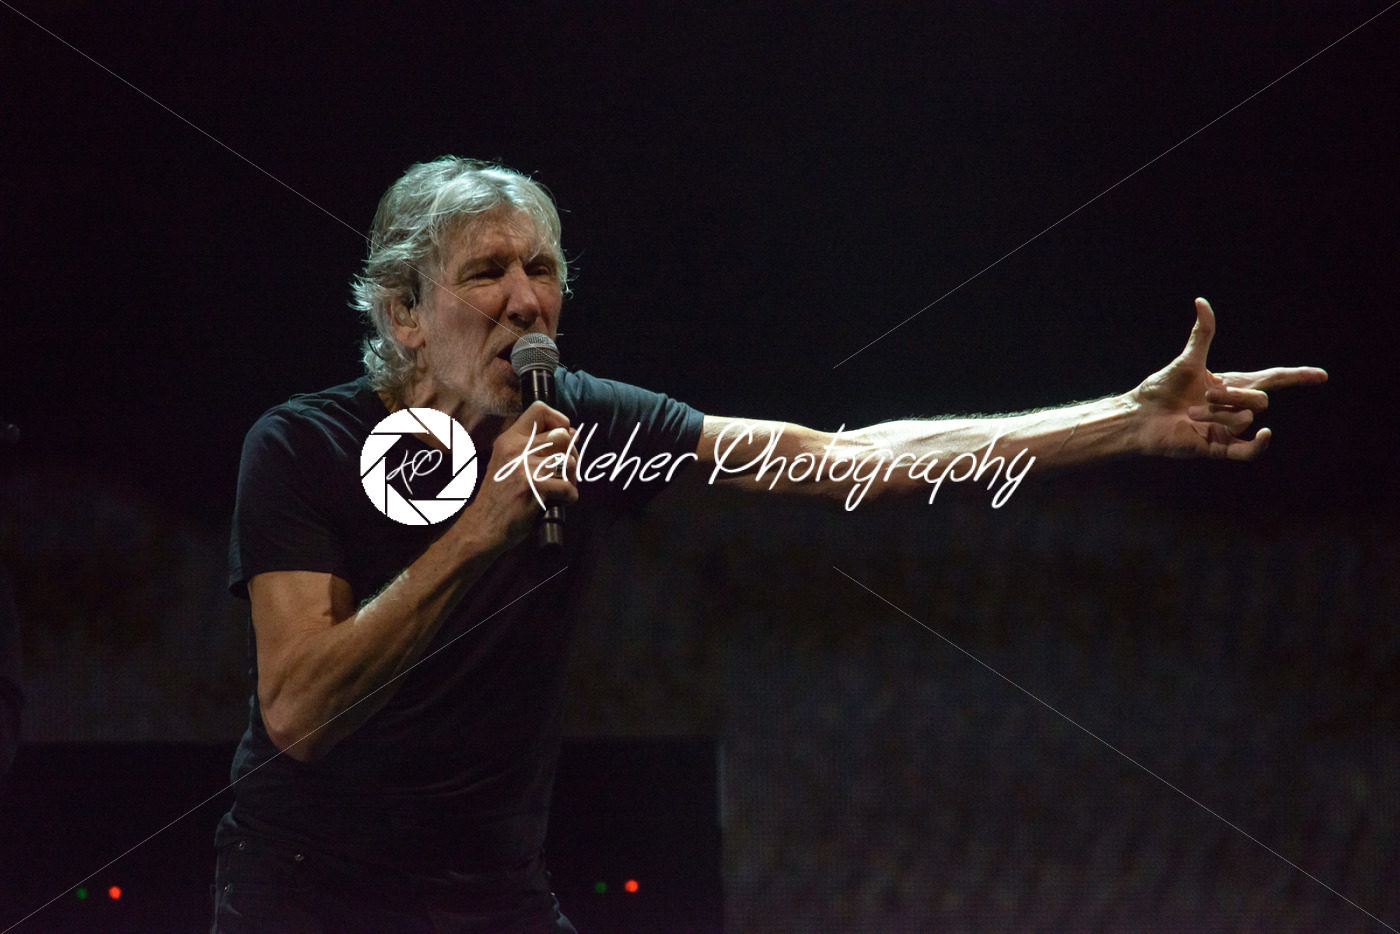 PHILADELPHIA, PA – AUGUST 8: Roger Waters performs in Philadelphia on his Us+Them tour on August 8, 2017 - Kelleher Photography Store